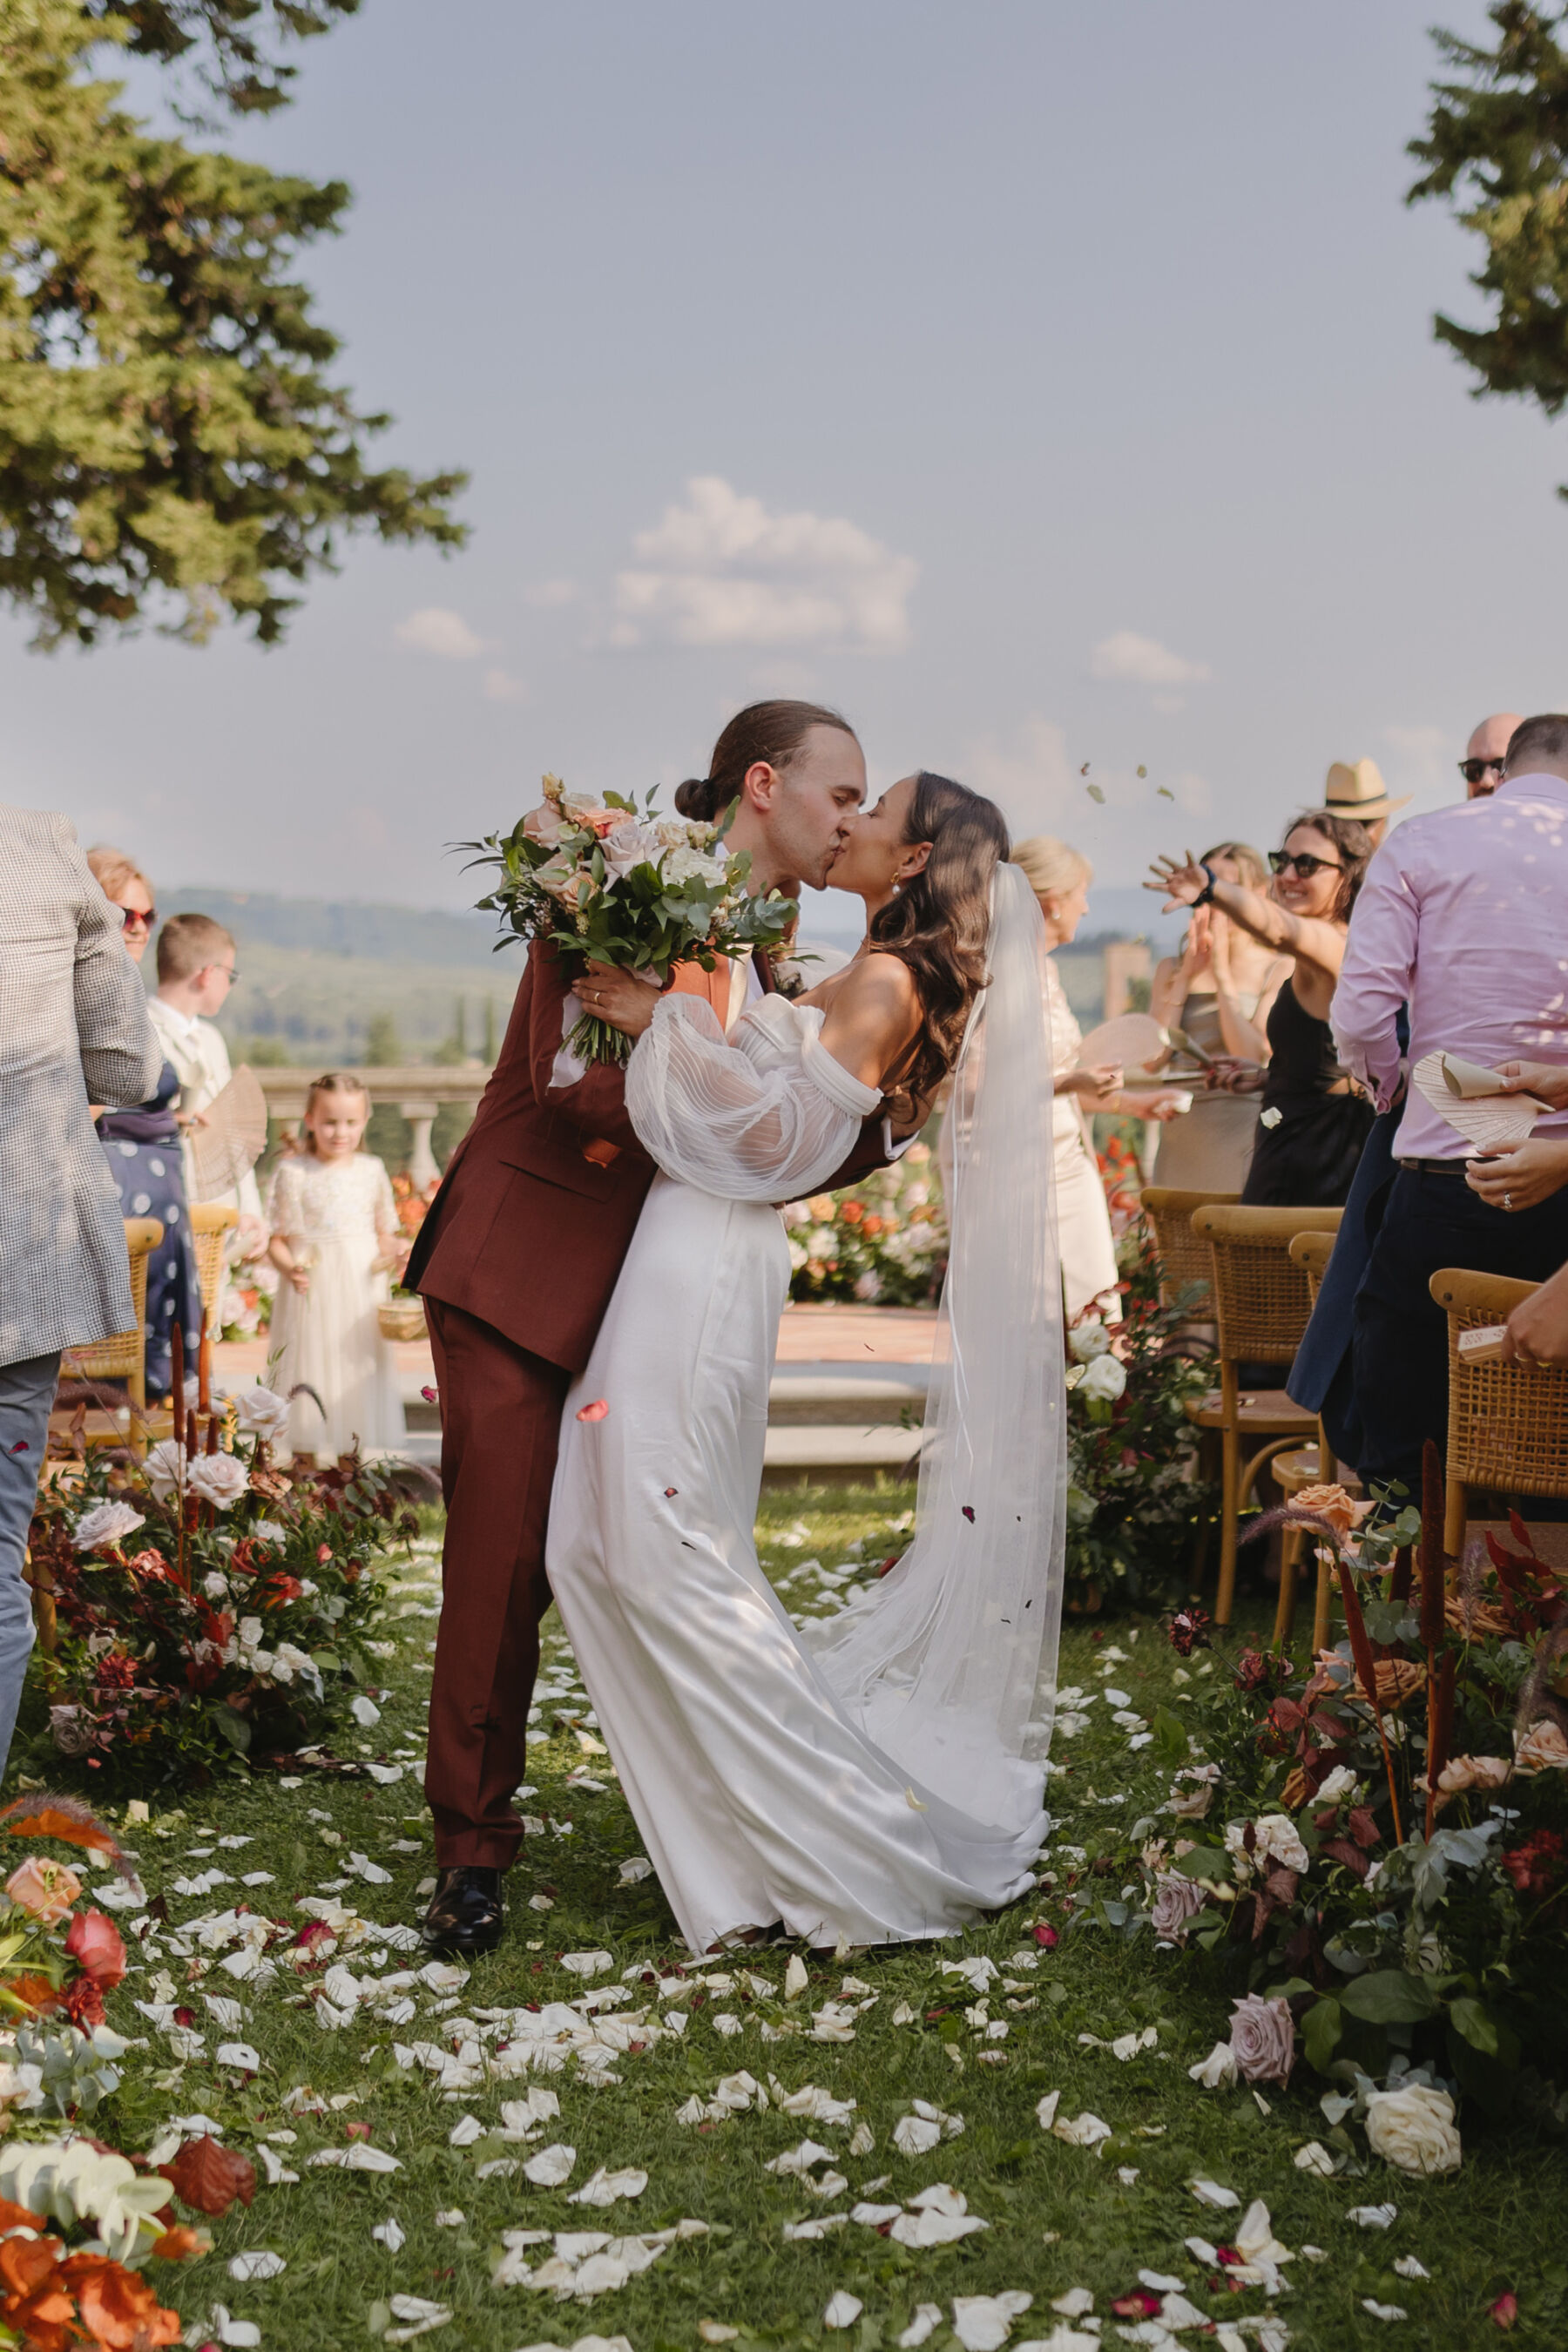 Bride and groom embracing whilst exiting down the aisle of their outdoor Italian wedding ceremony. He wears a burnt orange Paul Smith suit, the bride who is leaning back in the embrace, wears an Alena Leena wedding dress. The aisle is strewn with rose petals and the guests are showering the couple with confetti. Sunny wedding in Tuscany.